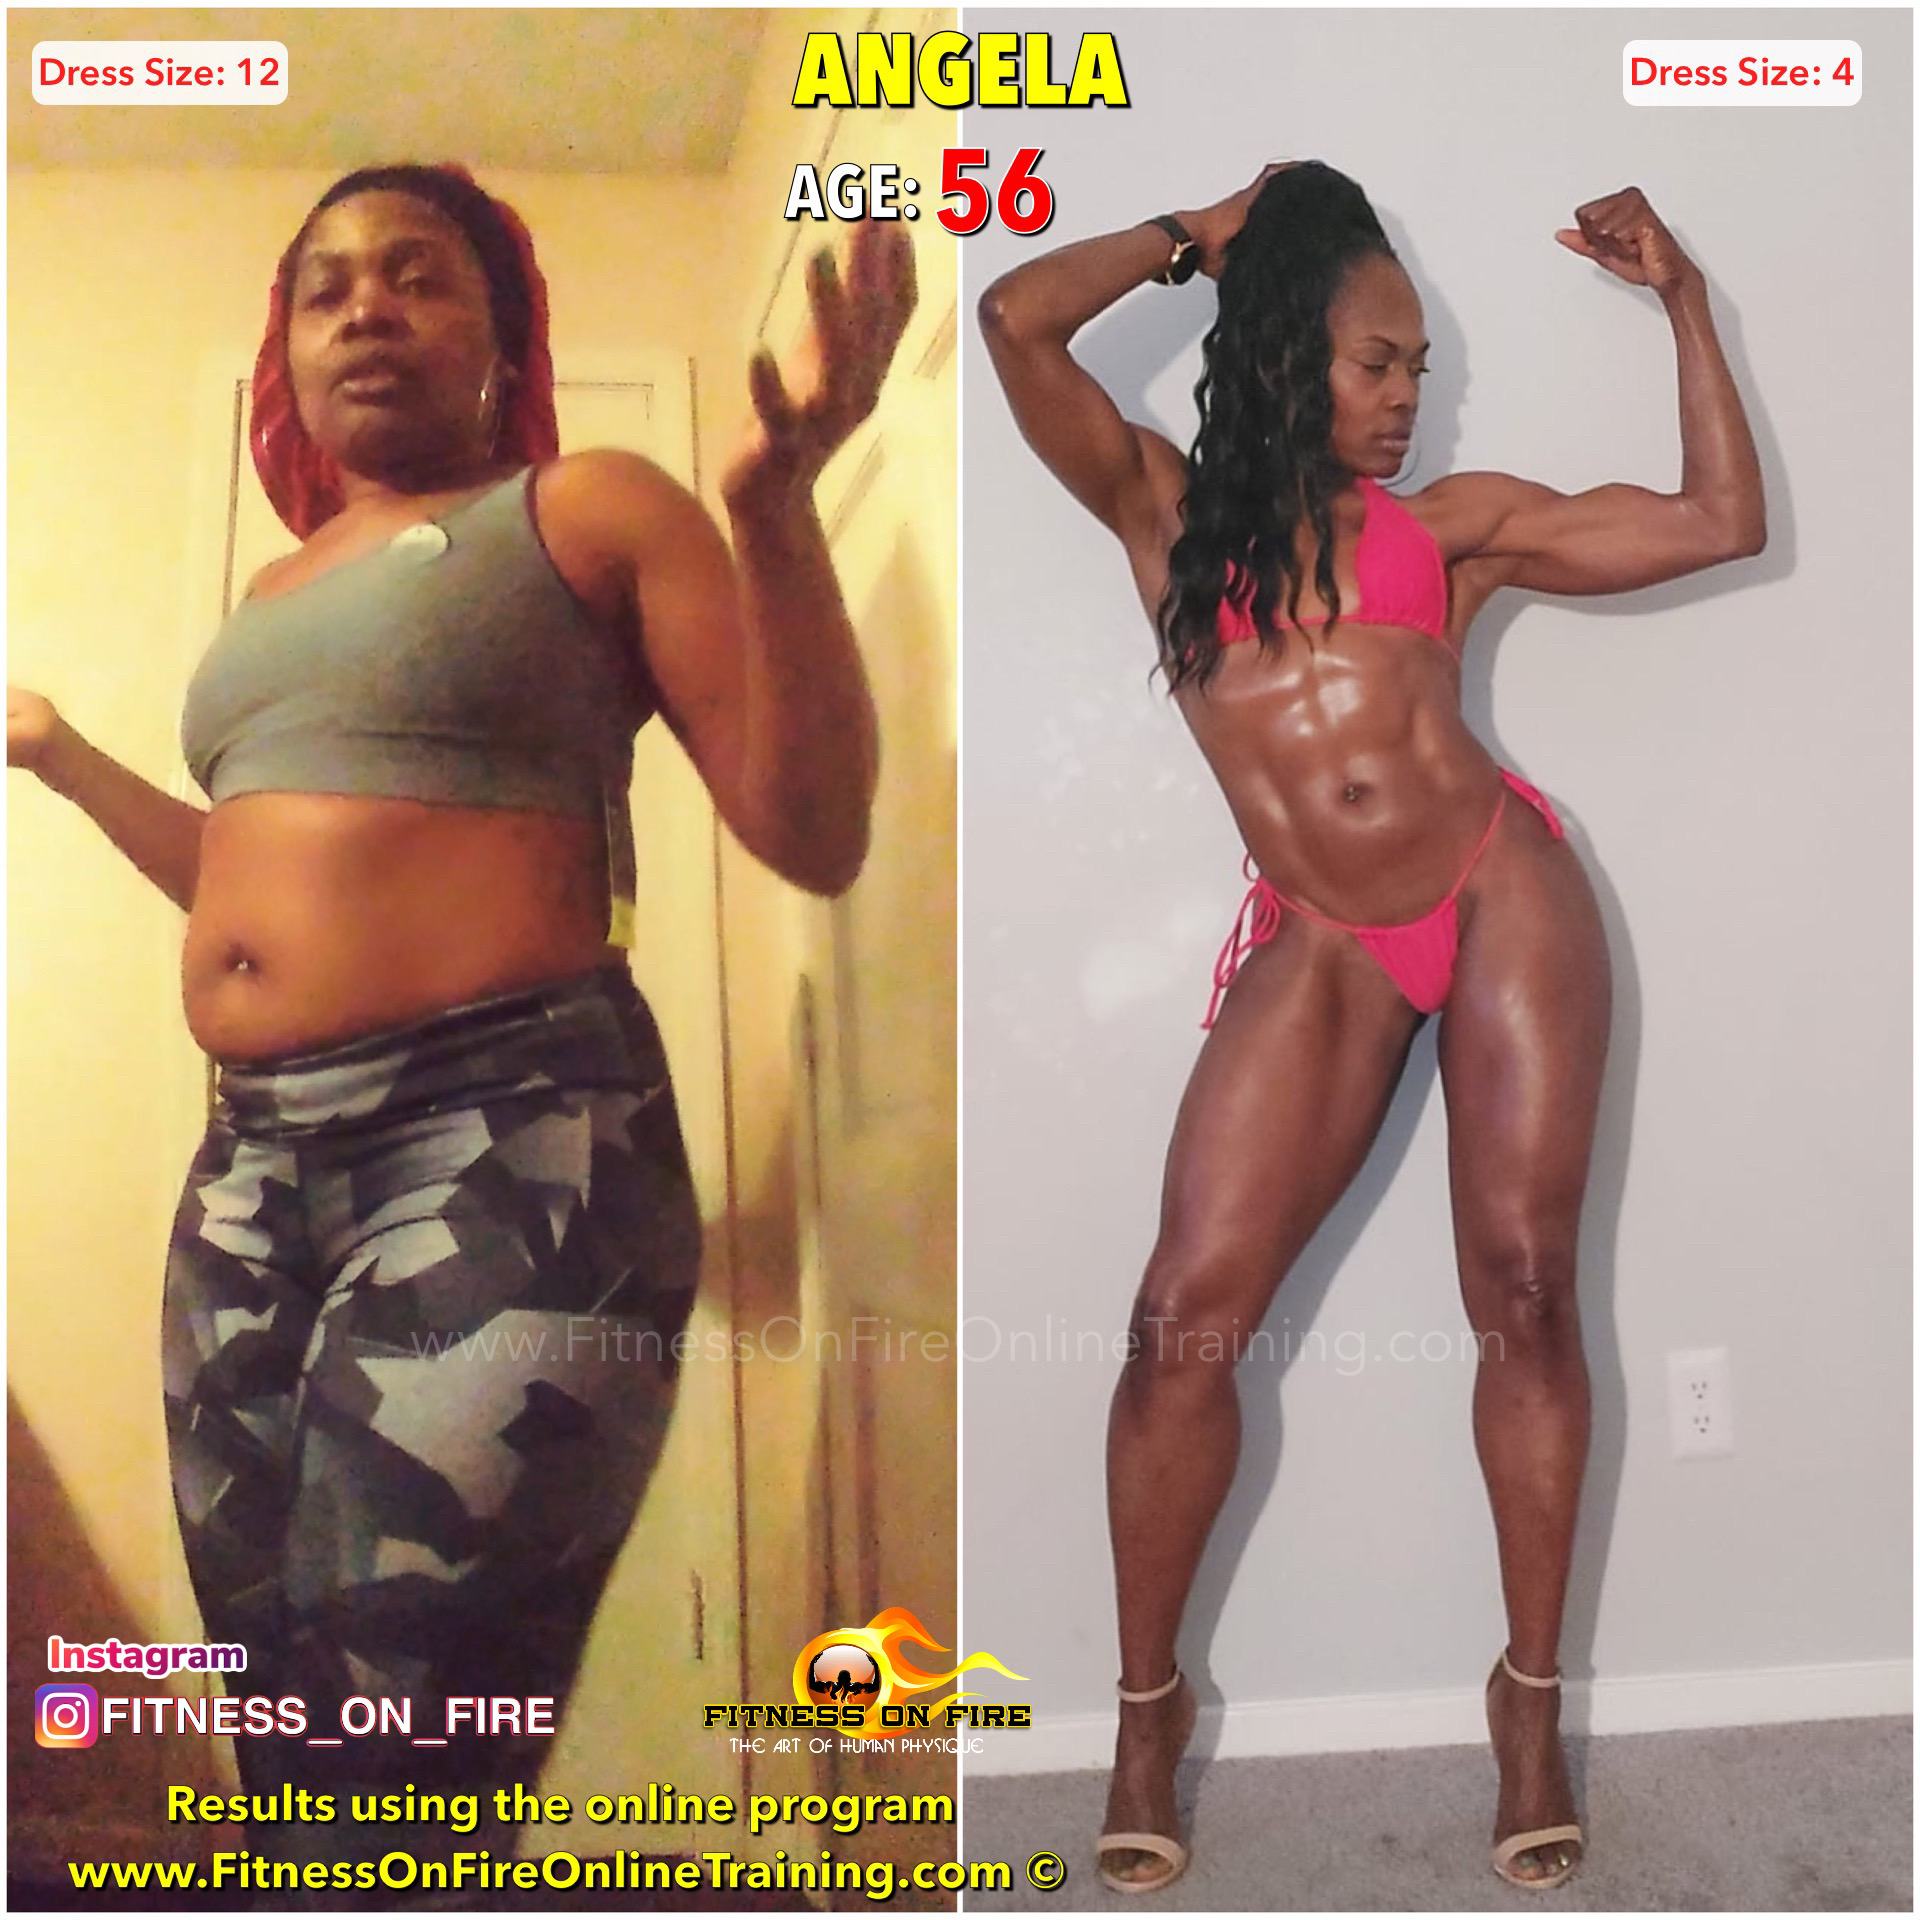 56 YEAR OLD ANGELA'S AMAZING ONLINE BODY TRANSFORMATION USING THE FITNESS  ON FIRE ONLINE TRAINING PROGRAM - Fitness On Fire Online Training